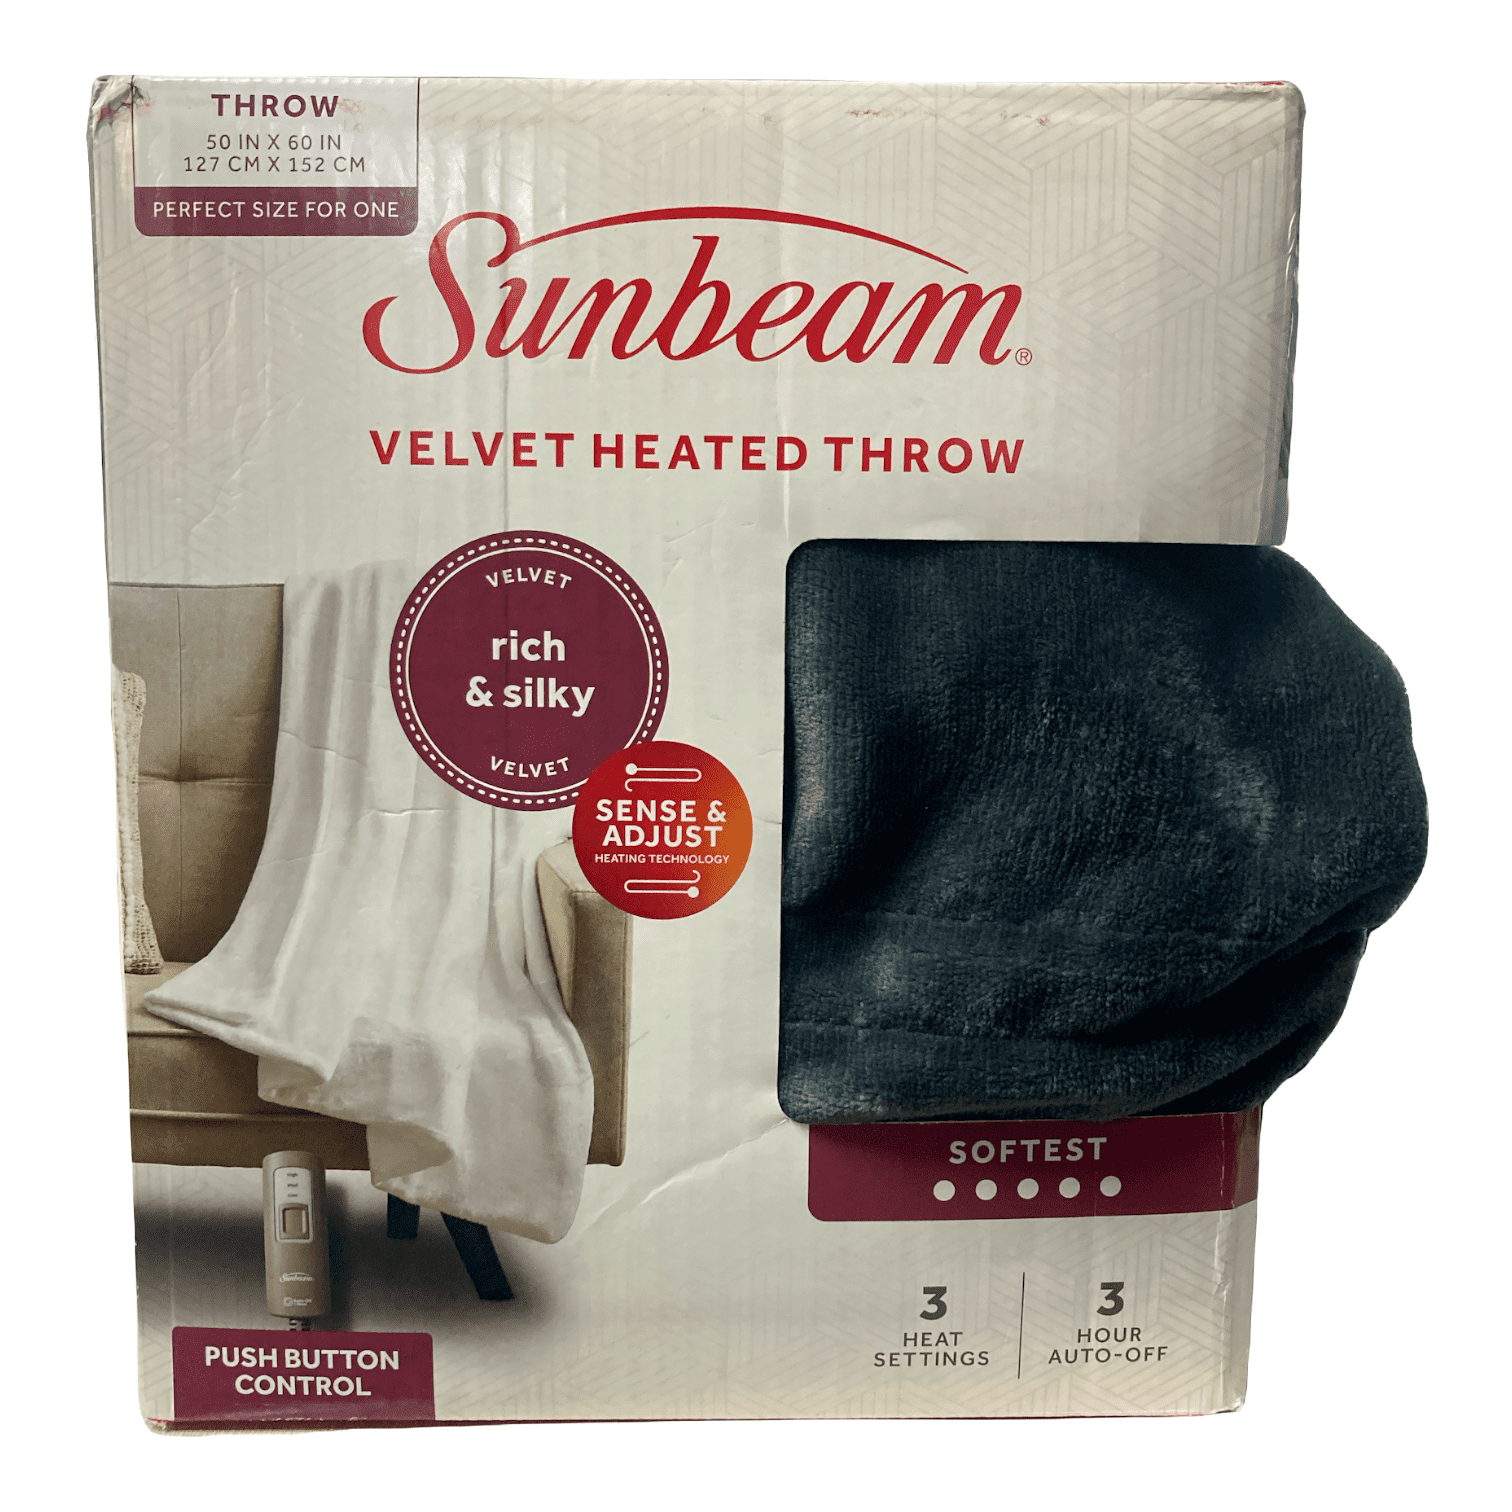 Beige/Tan/Brown Sunbeam Velvet Soft Plush Heated Throw Blanket Various Colors Size: 50 x 60 3 Heat Setting Remote Control Auto Off Cocoa 